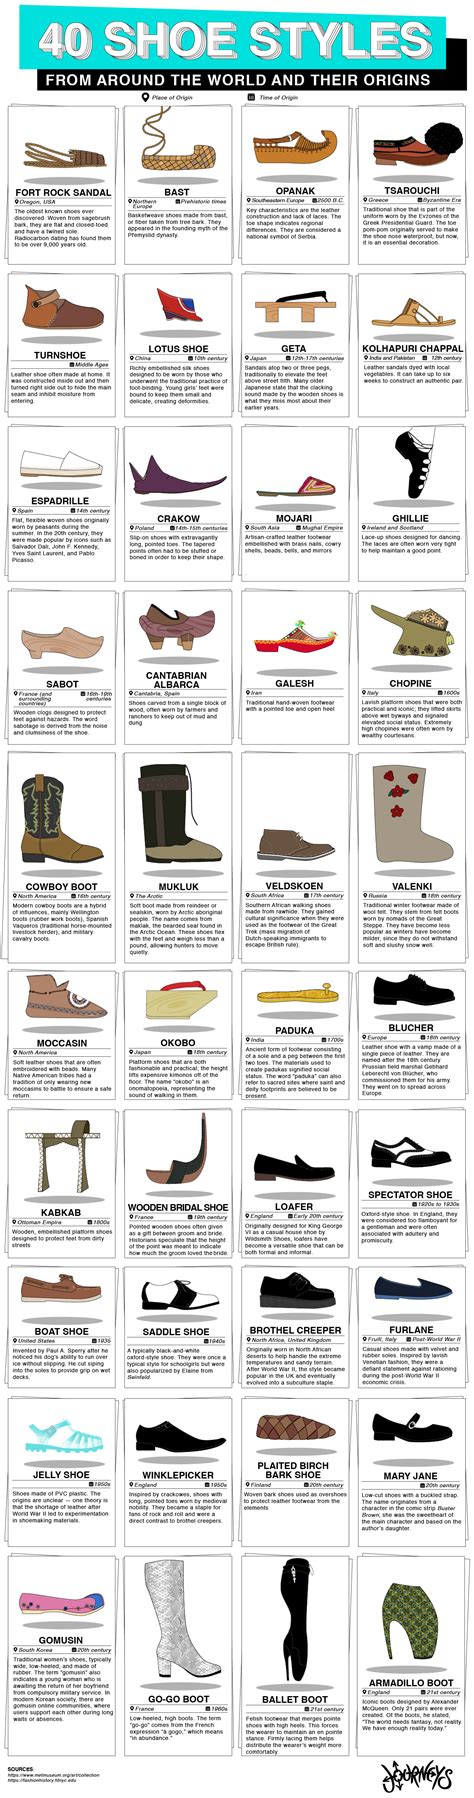 40 Shoes Styles From Around The World And Their Origins Infographic